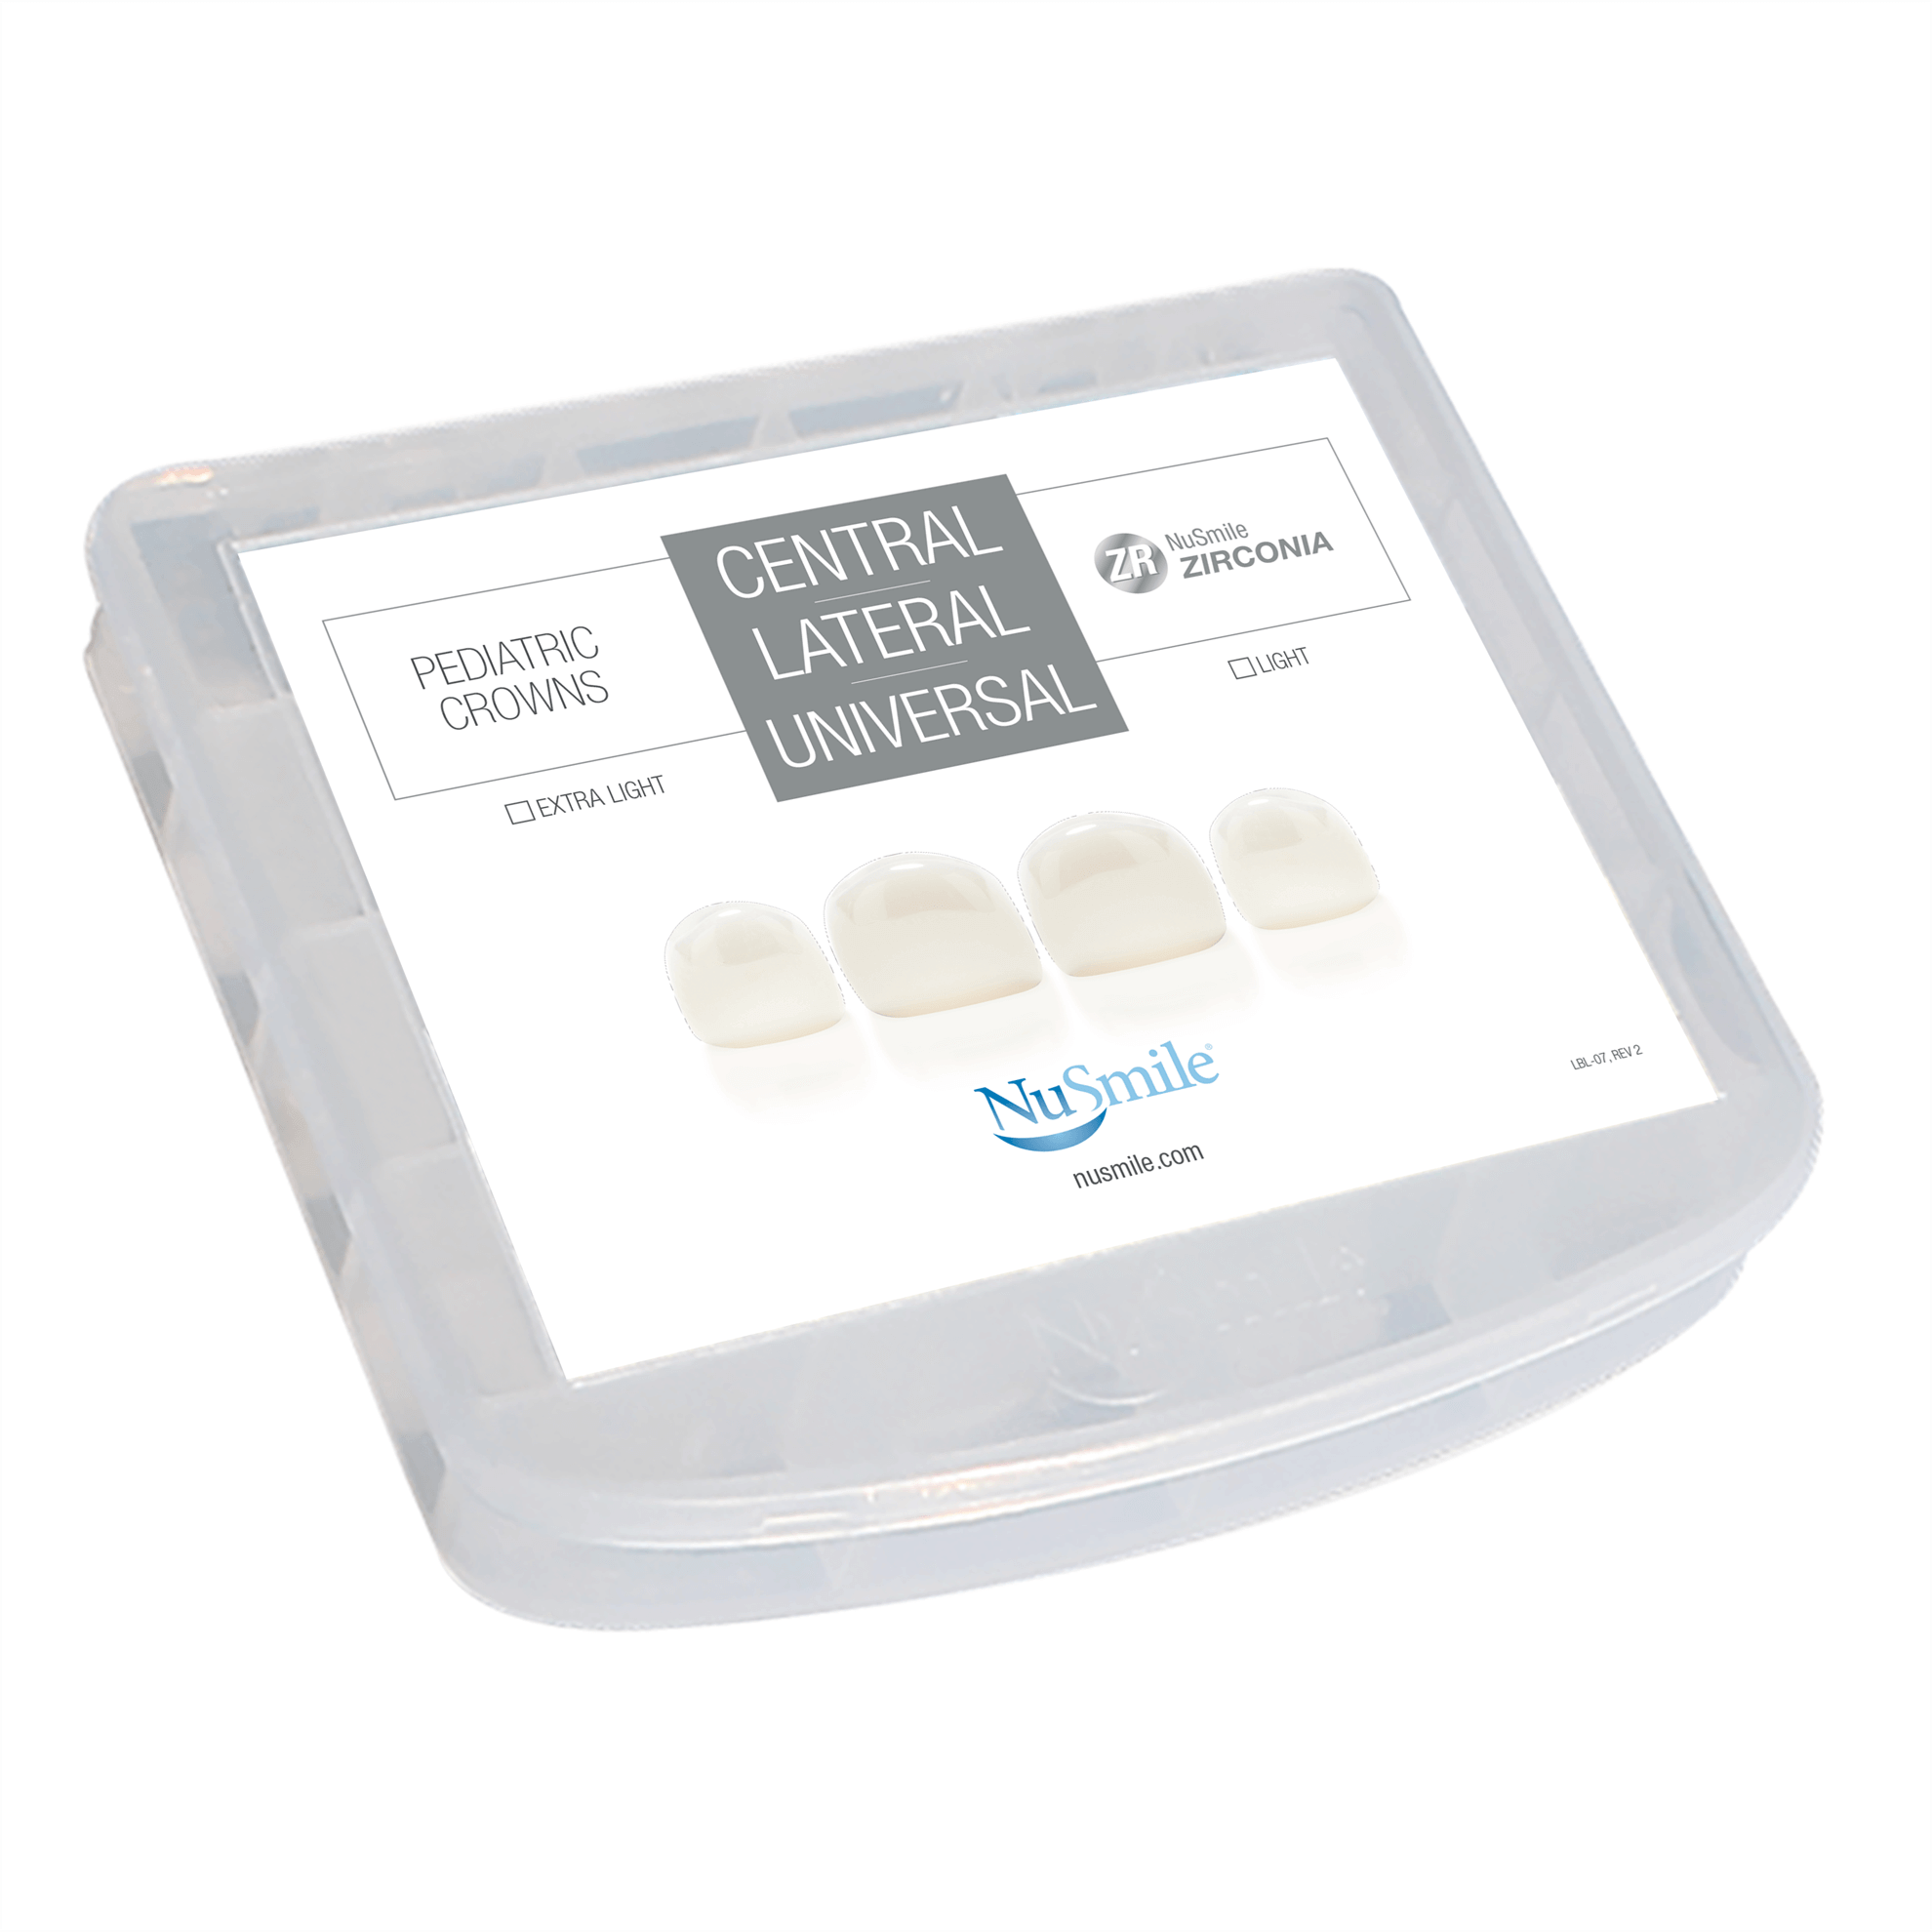 NuSmile ZR Zirconia Central / Lateral / Universal Incisor Crown Storage Box